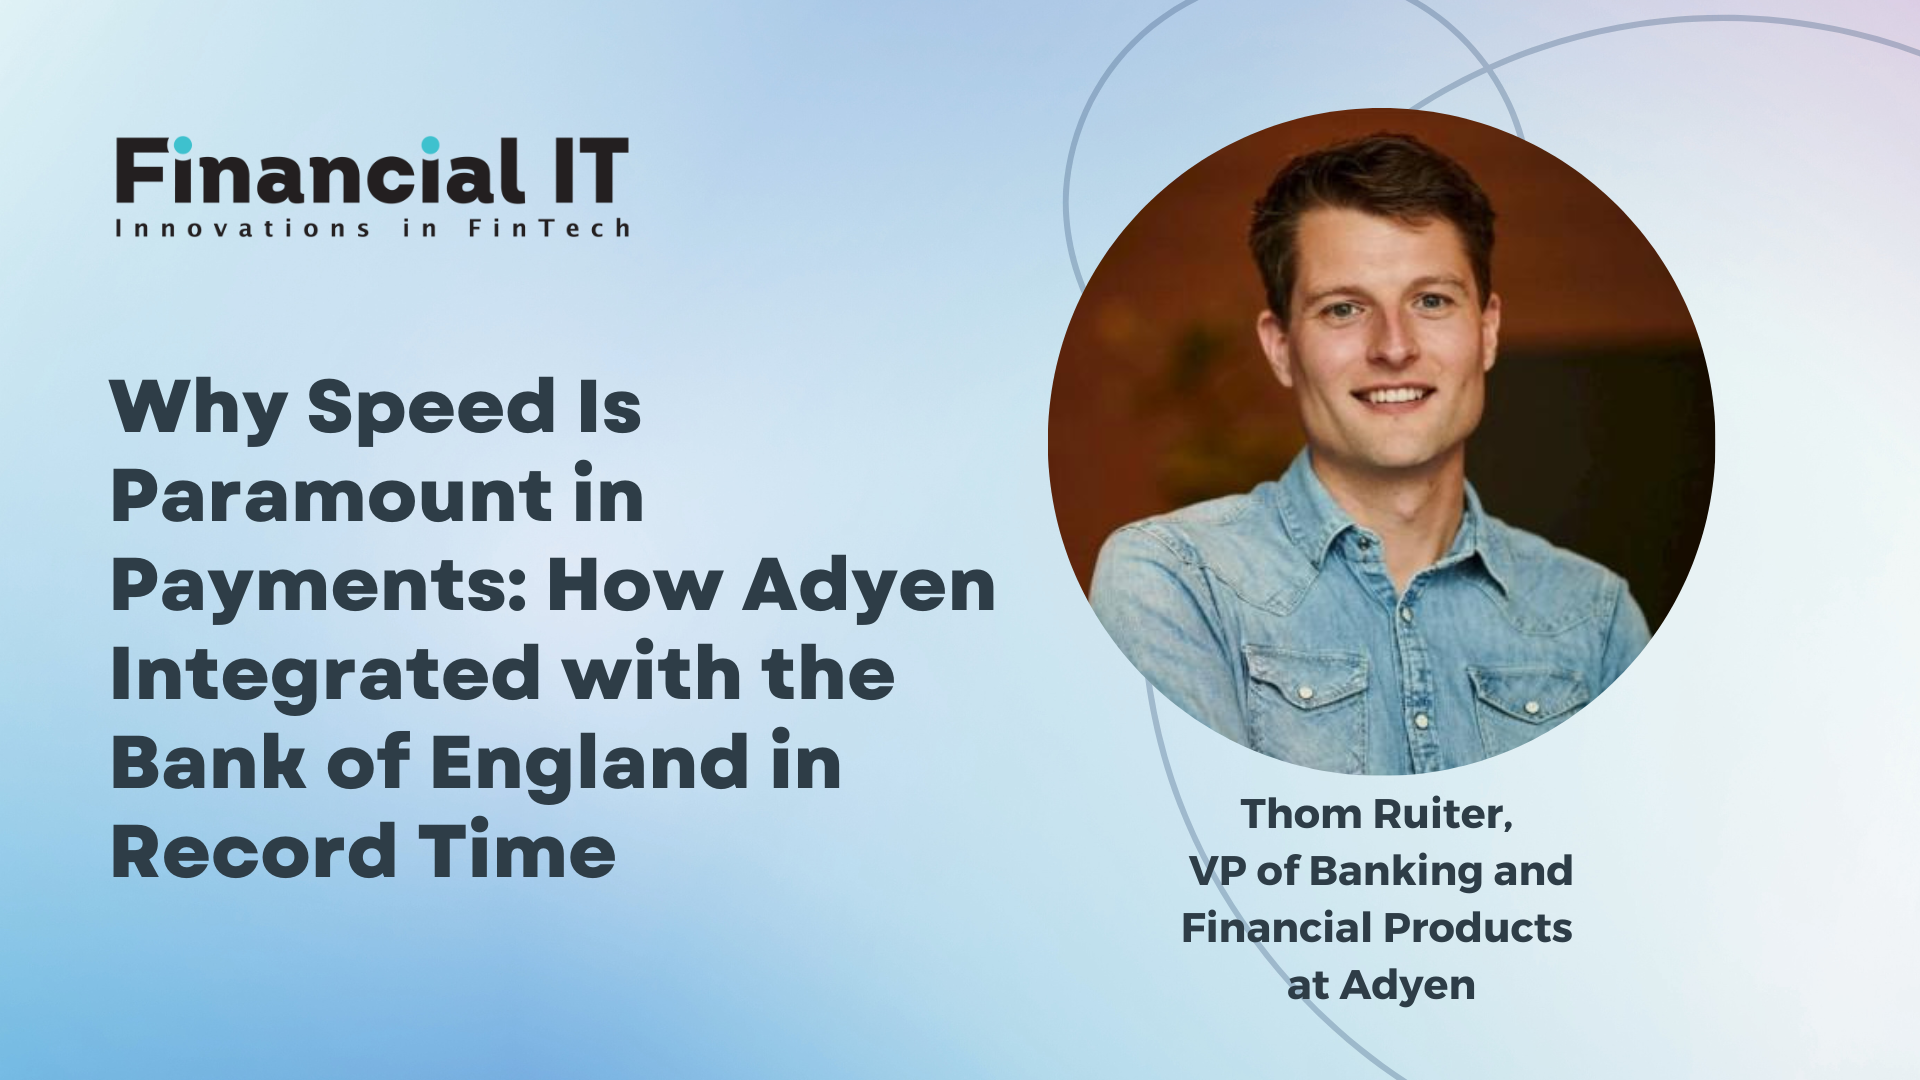 Why Speed Is Paramount in Payments: How Adyen Integrated with the Bank of England in Record Time